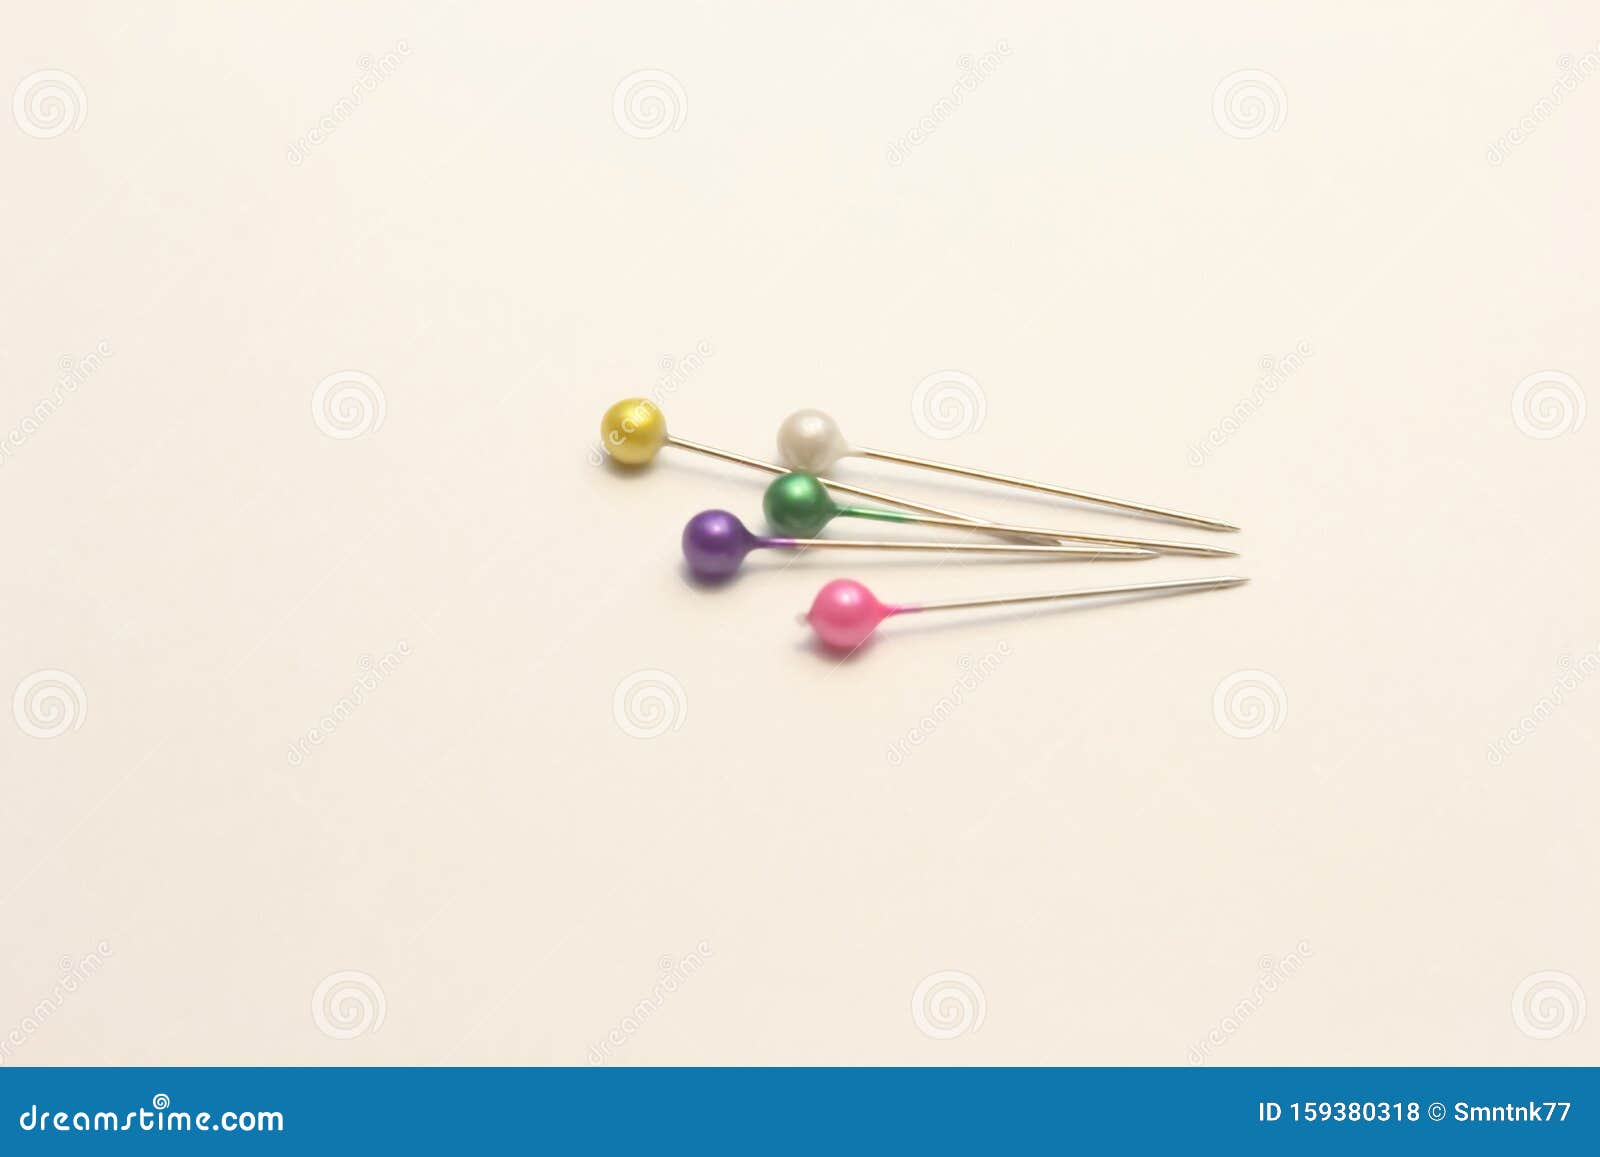 Stationery Pins on a White Background Stock Photo - Image of beautiful ...